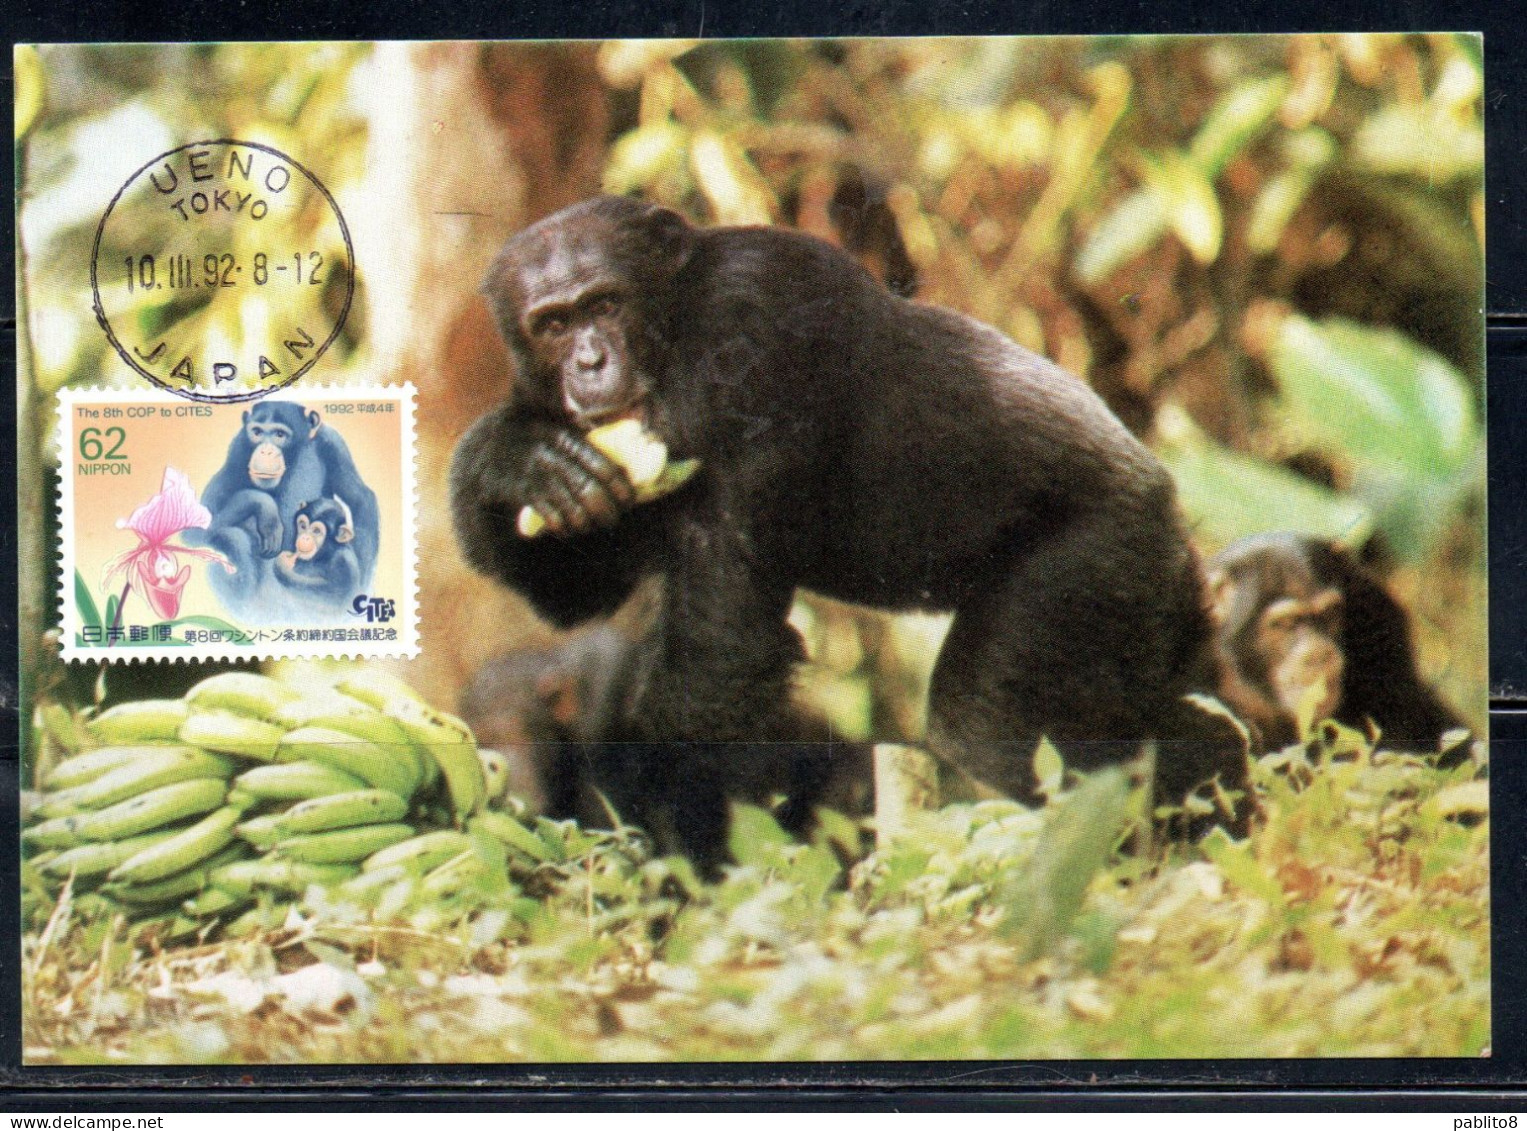 JAPAN GIAPPONE 1992 CONFERENCE ON INTERNATIONAL TRADE IN ENDANGERED SPECIES CITES CHIMPANZEES 62y MAXI MAXIMUM CARD - Maximumkarten